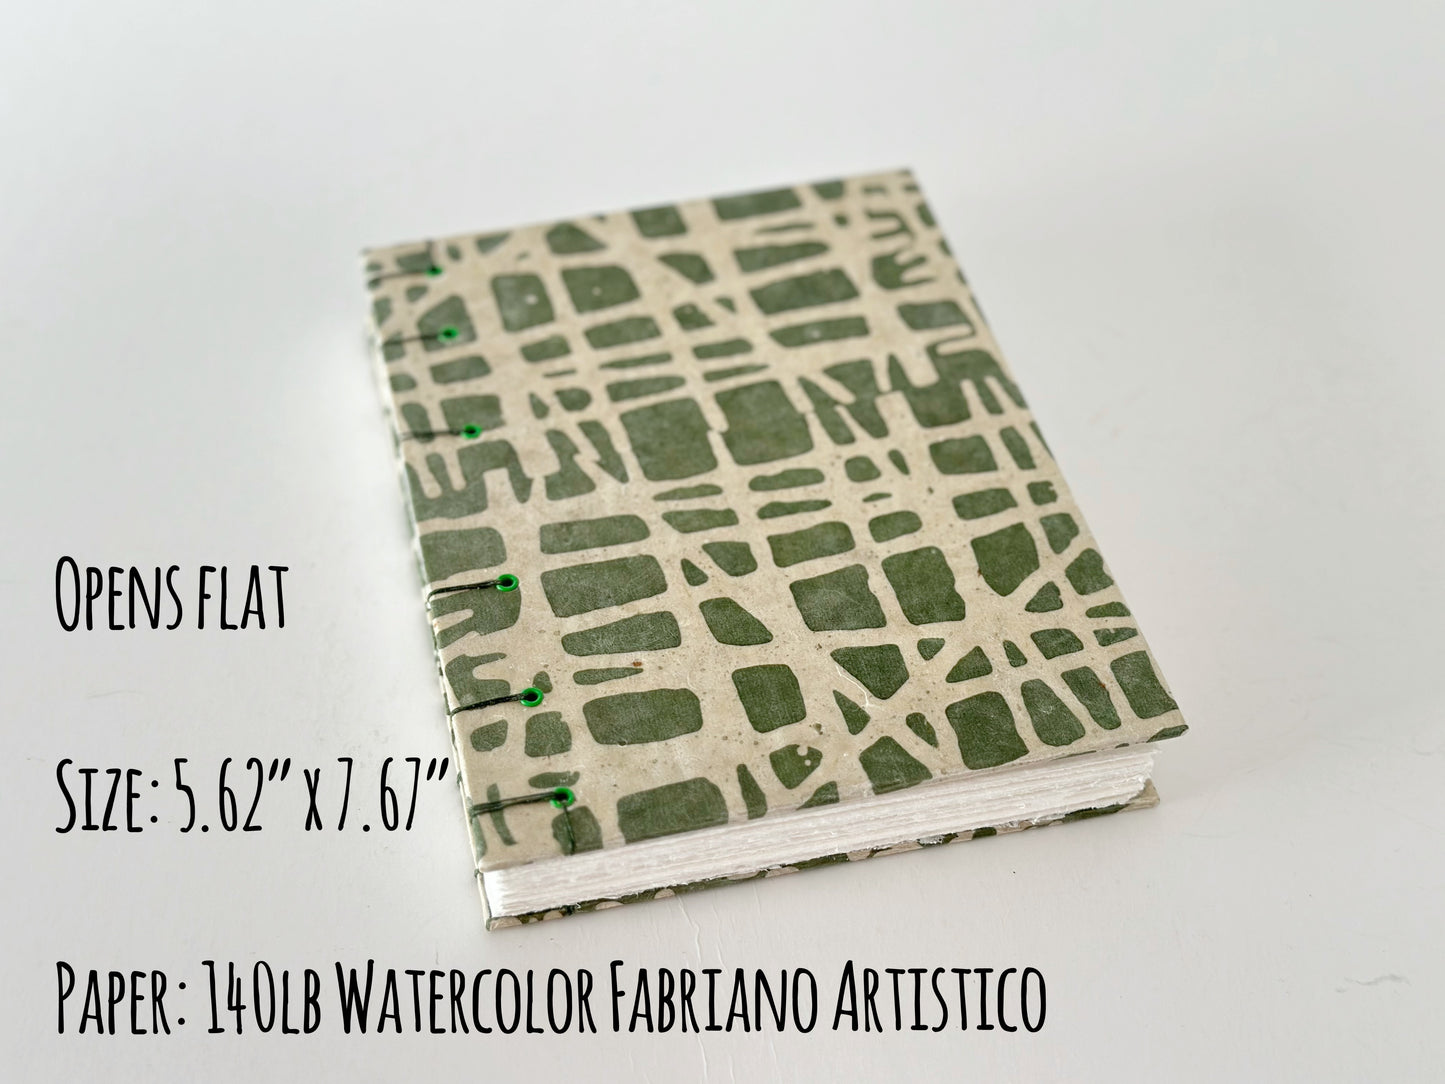 Hardcover Watercolor Journal Sketchbook with Fabriano Cotton Hot pressed paper and Open (Lay flat) Spine, Coptic Notebook Gift for artist